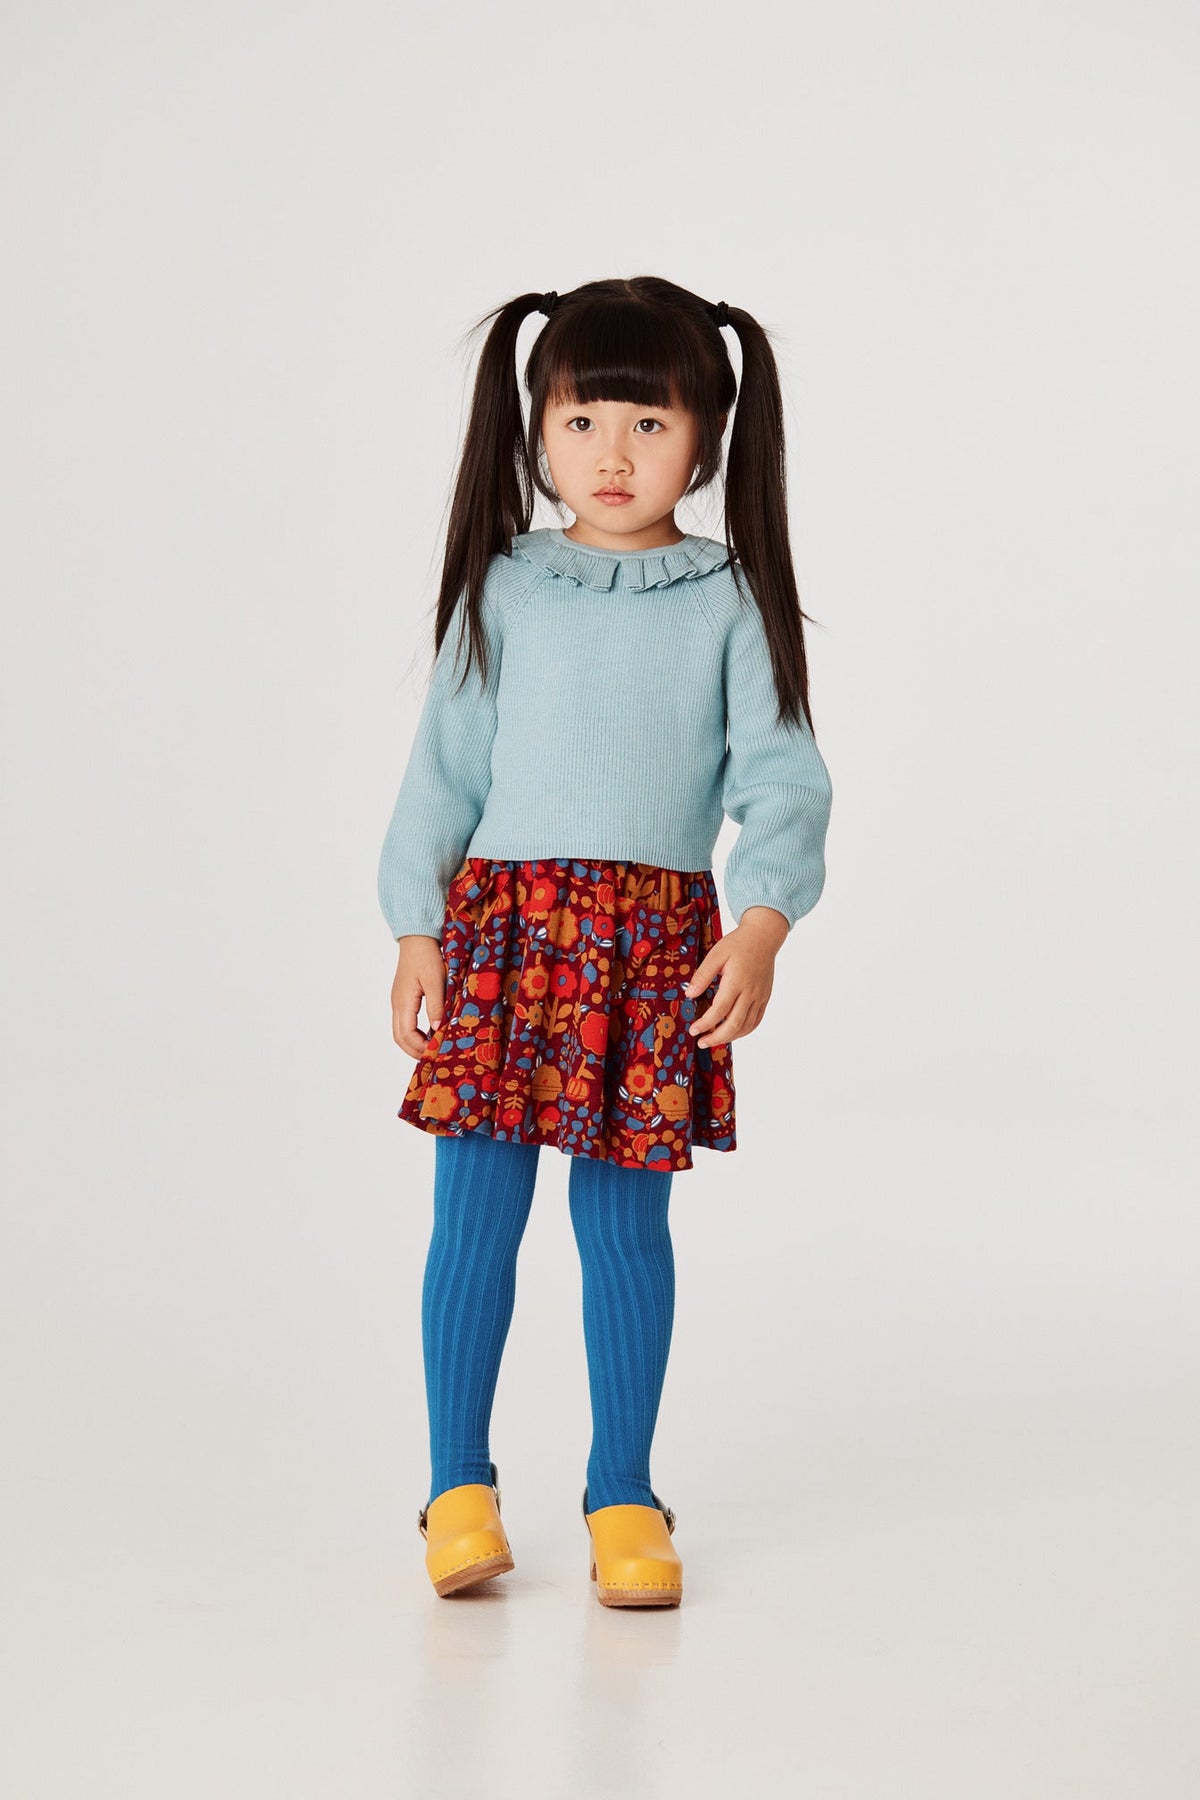 Circle Skirt - Cranberry Playground+Model is 41 inches tall, 38lbs, wearing a size 4-5y